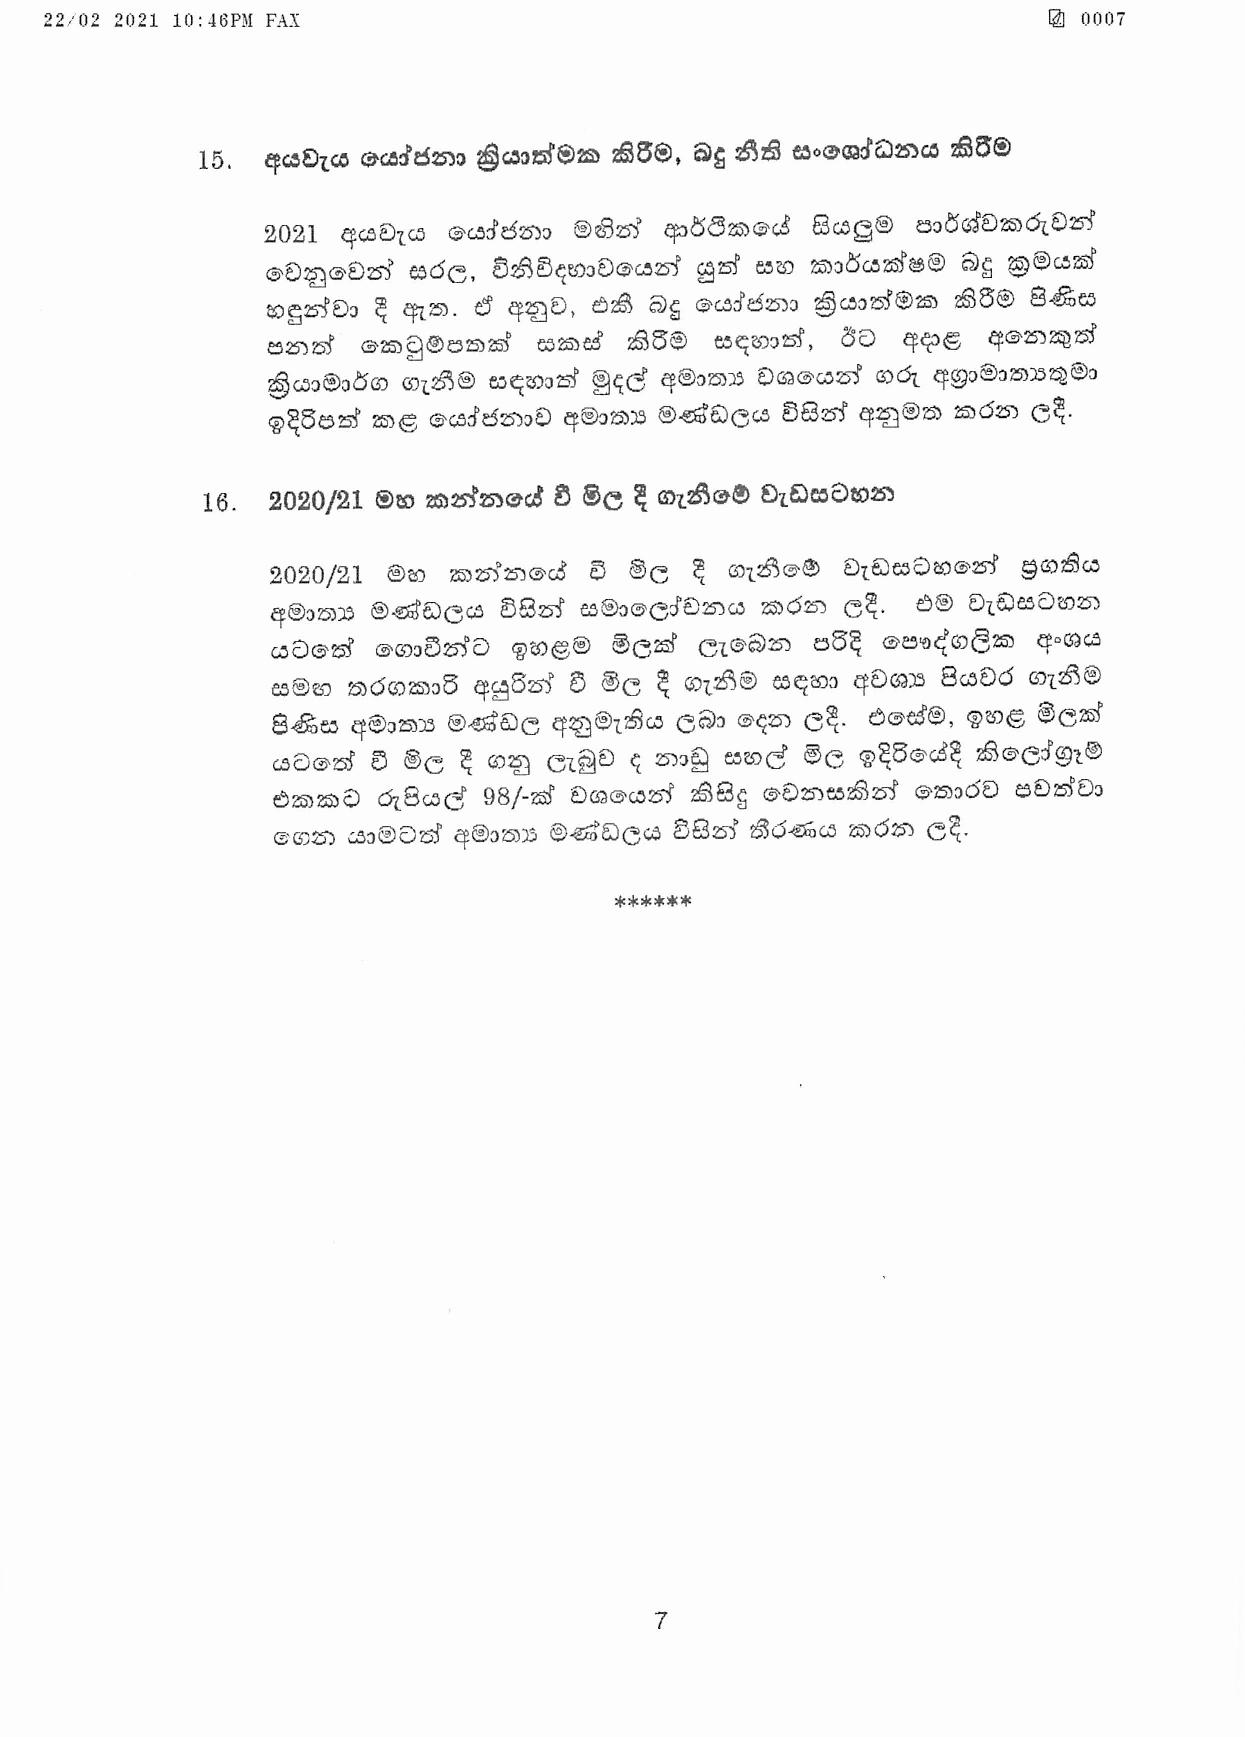 Cabinet Decision on 22.02.2021 page 007